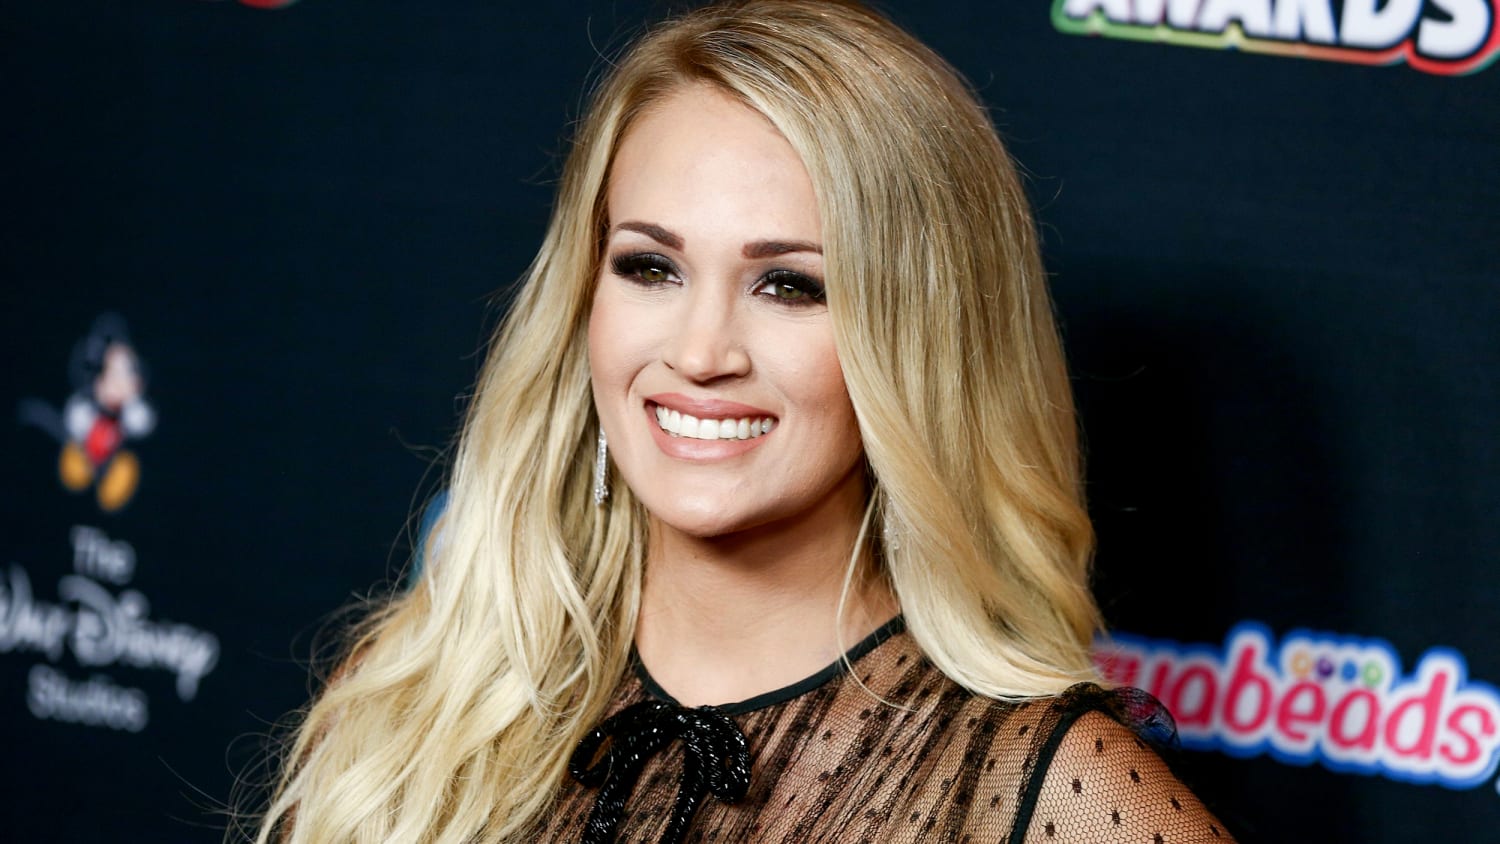 Carrie Underwood Drops Major Update About the Sunday Night